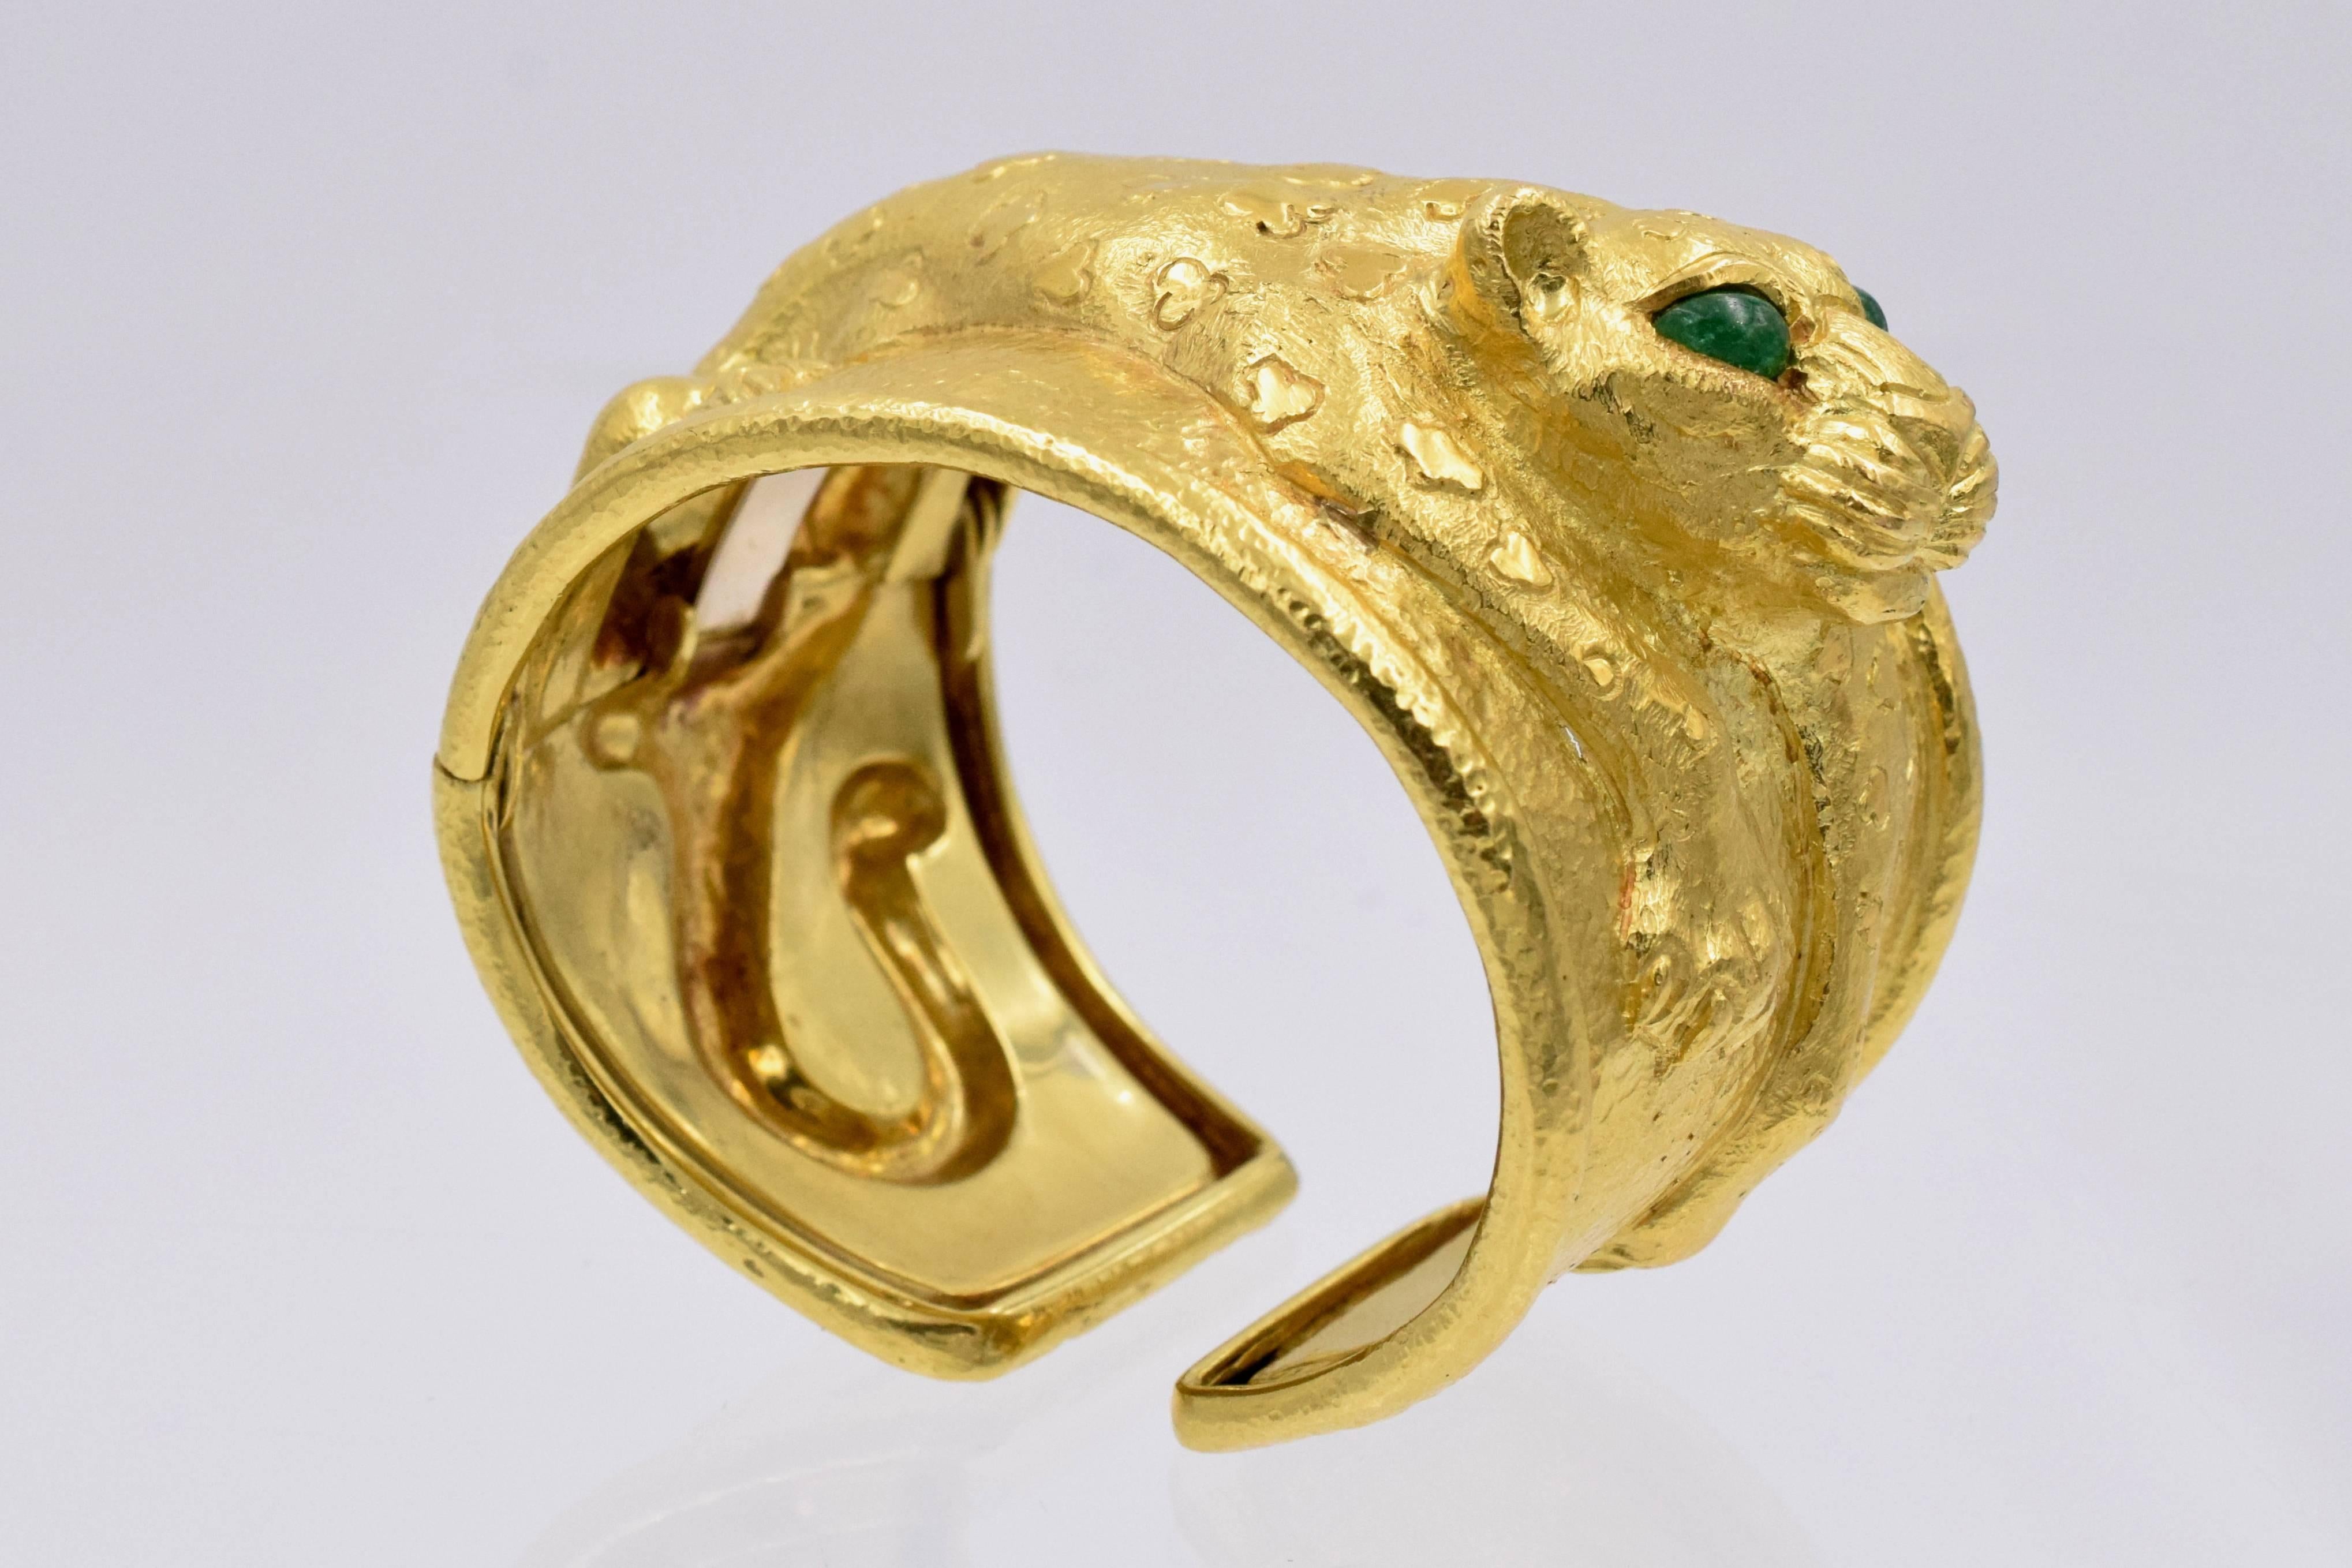 Bold look of David Webb gold cuff bracelet,  18k yellow gold with emerald eye leopard on the top .
Maker's signature: David Webb
Weight: 99 grams
Wrist size is: 6 inches